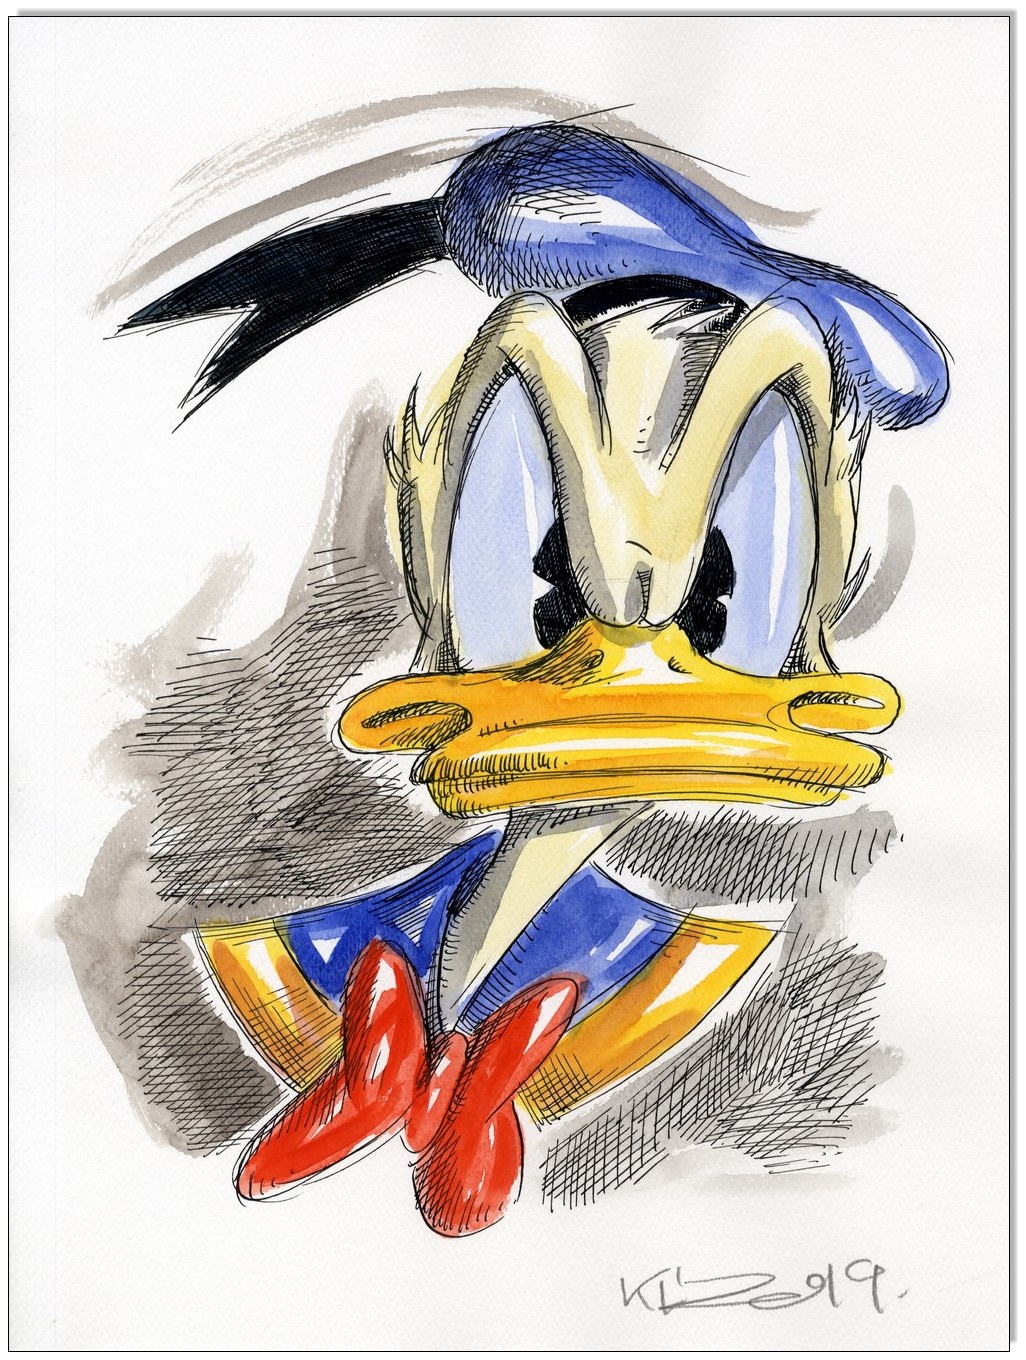 Donald Duck Angry Donald - 24 x 32 cm